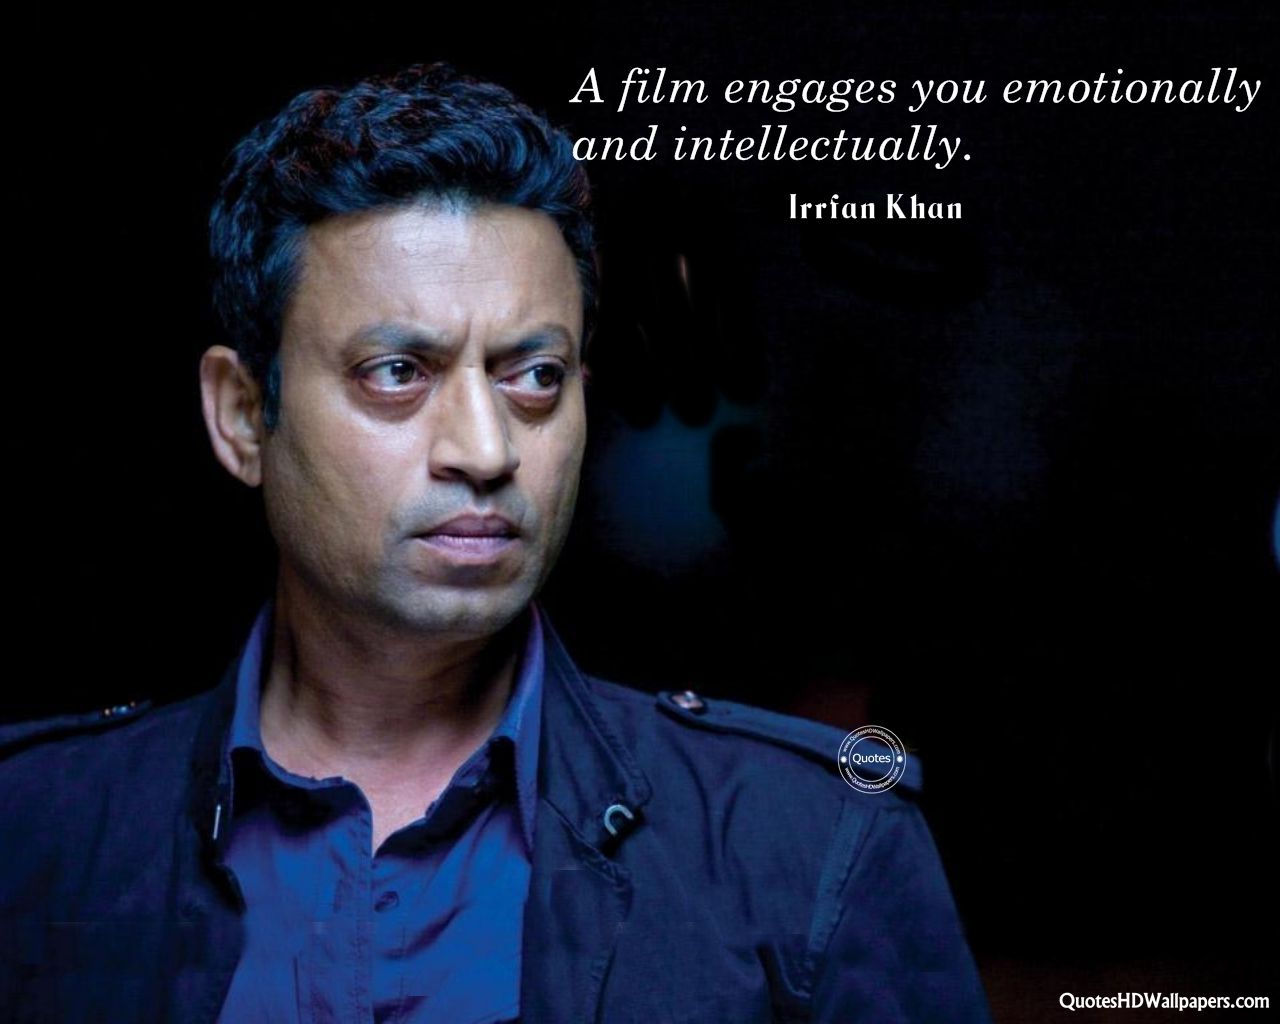 Irrfan Khan's quotes, famous and not much Quotes 2019